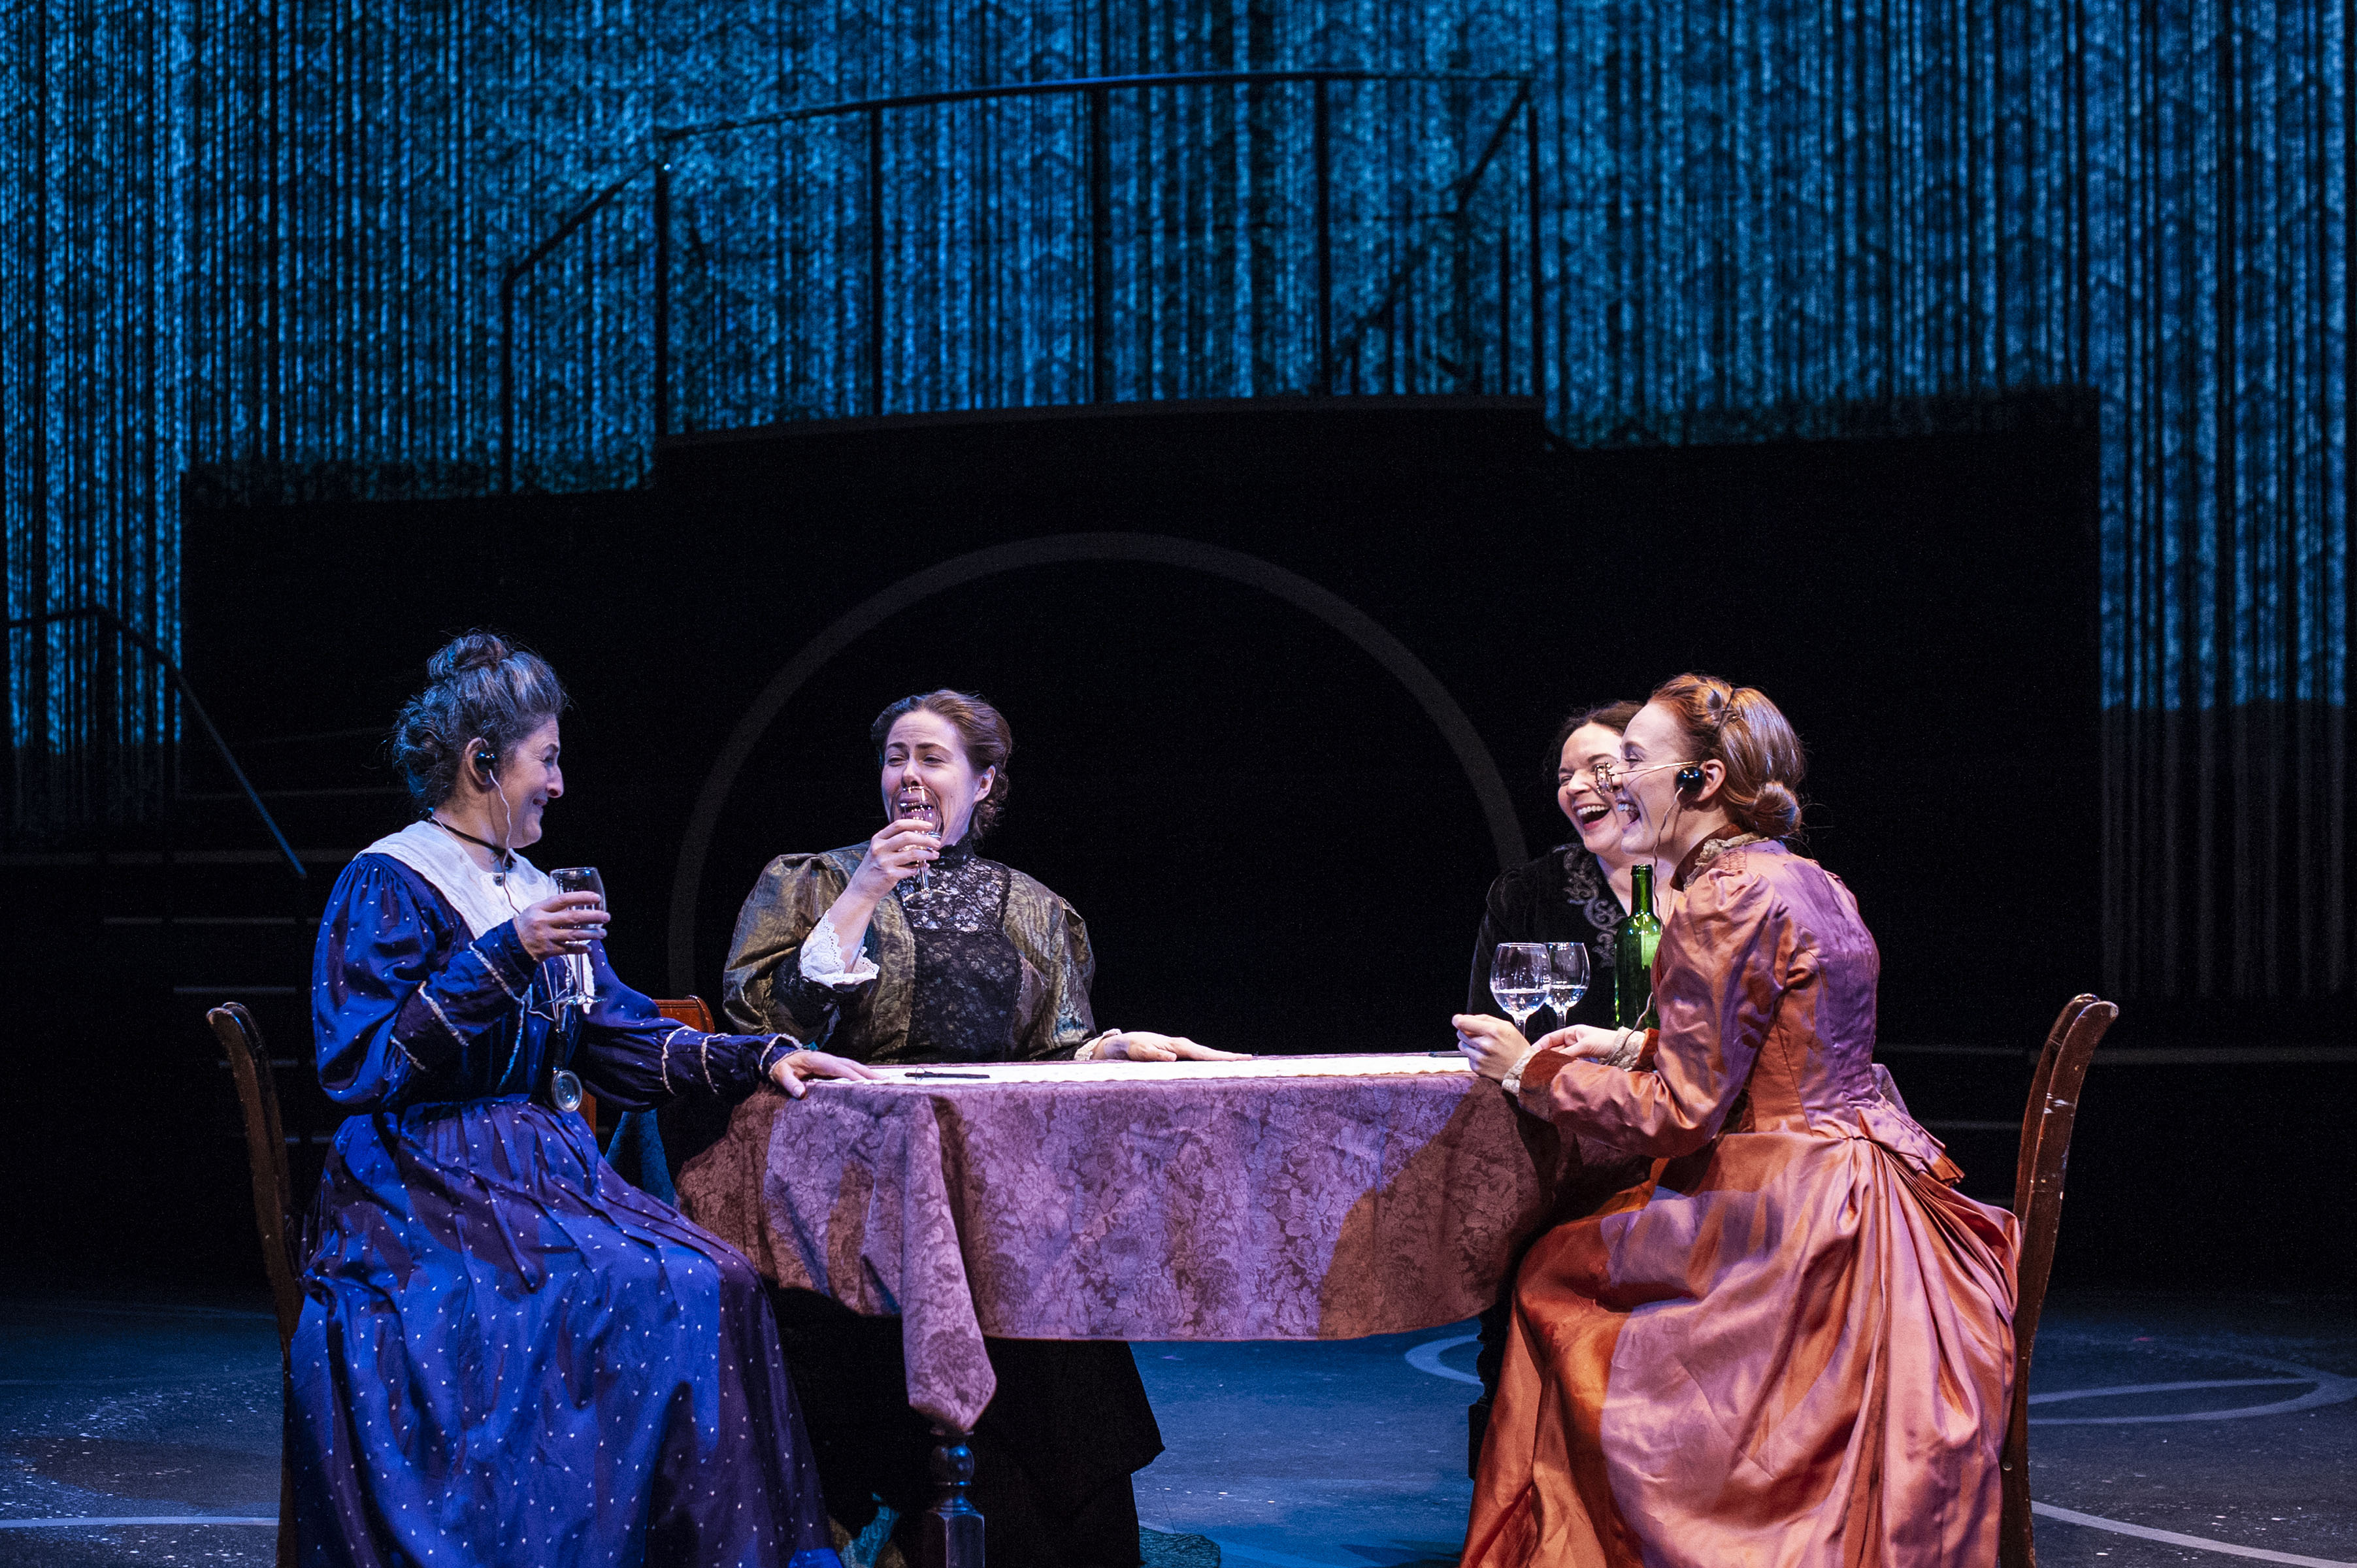 Sarah Newhouse (Annie Jump Cannon), Christine Power (Antonia Maury), Becca A. Lewis (Williamina Fleming) & Sarah Oakes Muirhead (Henrietta Swan Leavitt) in THE WOMEN WHO MAPPED THE STARS. Photo: A.R. Sinclair Photography.